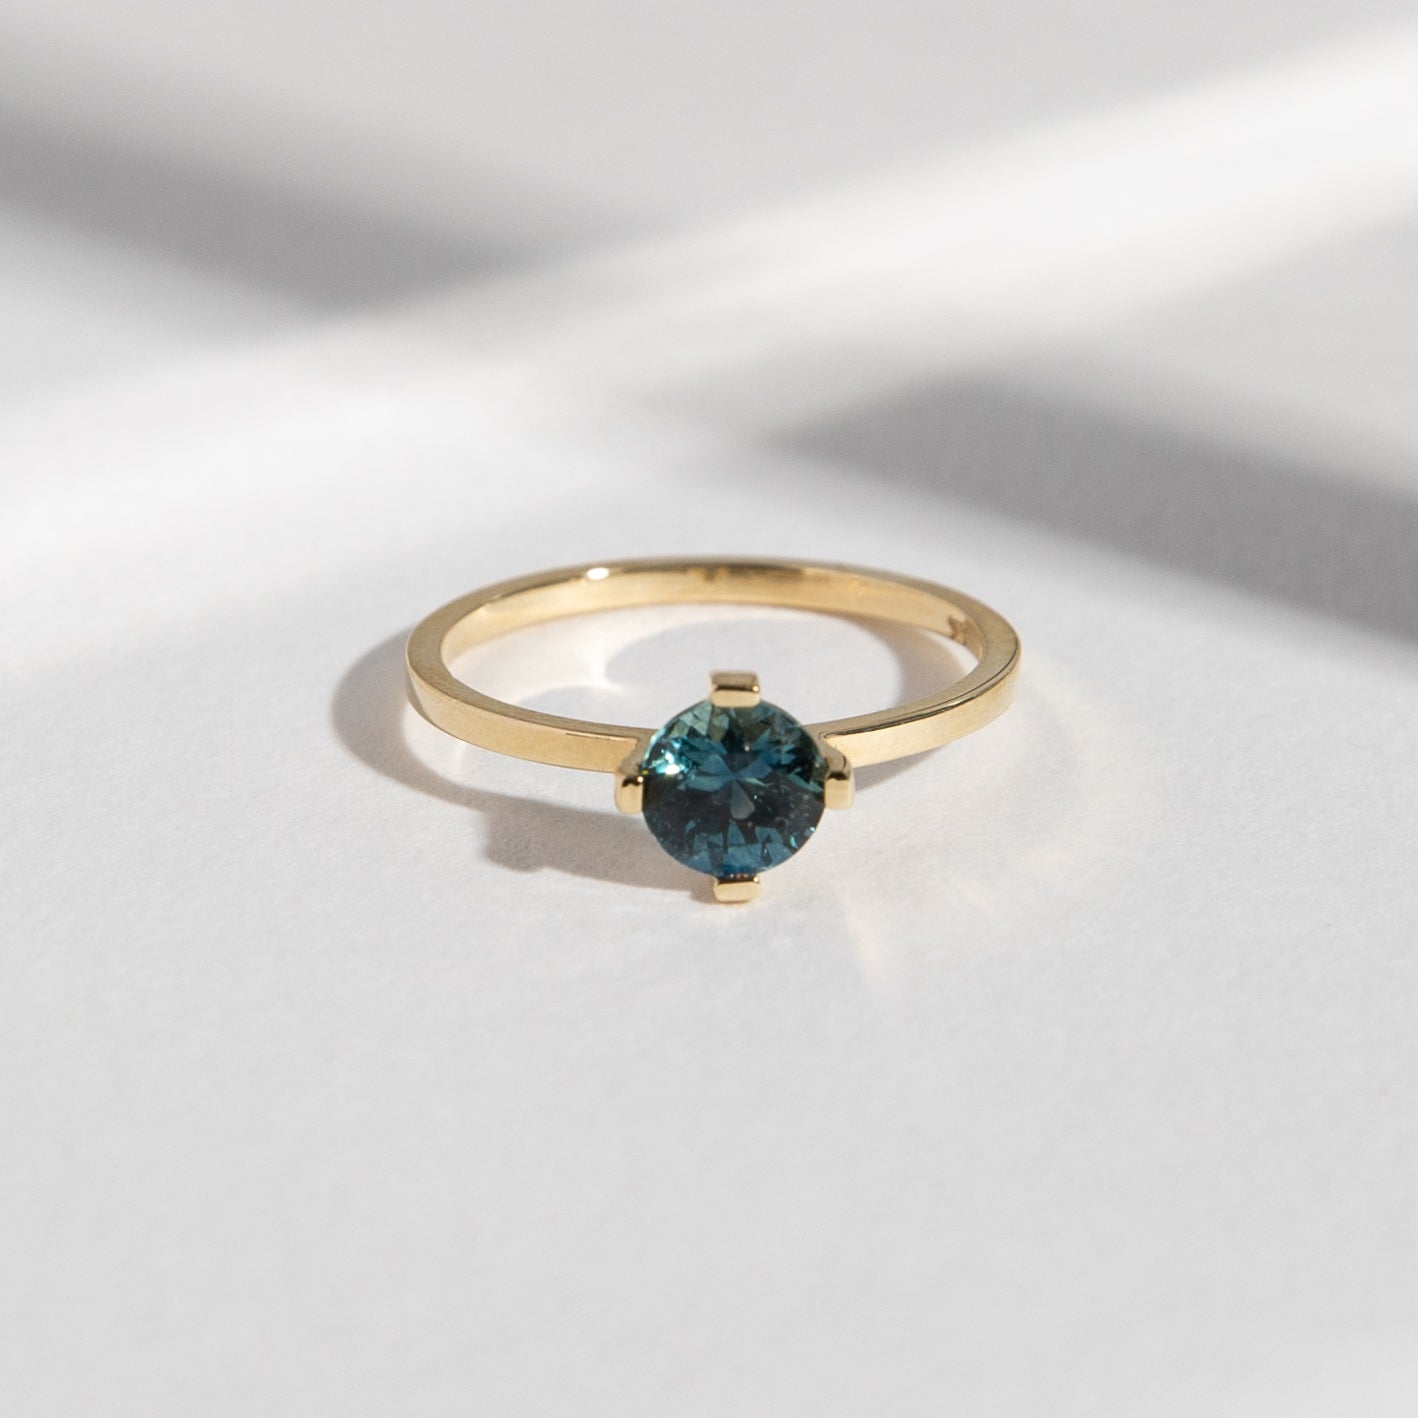 Ema Cool Ring in 14k Gold set with a 0.8ct medium round brilliant cut denim color sapphire By SHW Fine Jewelry NYC